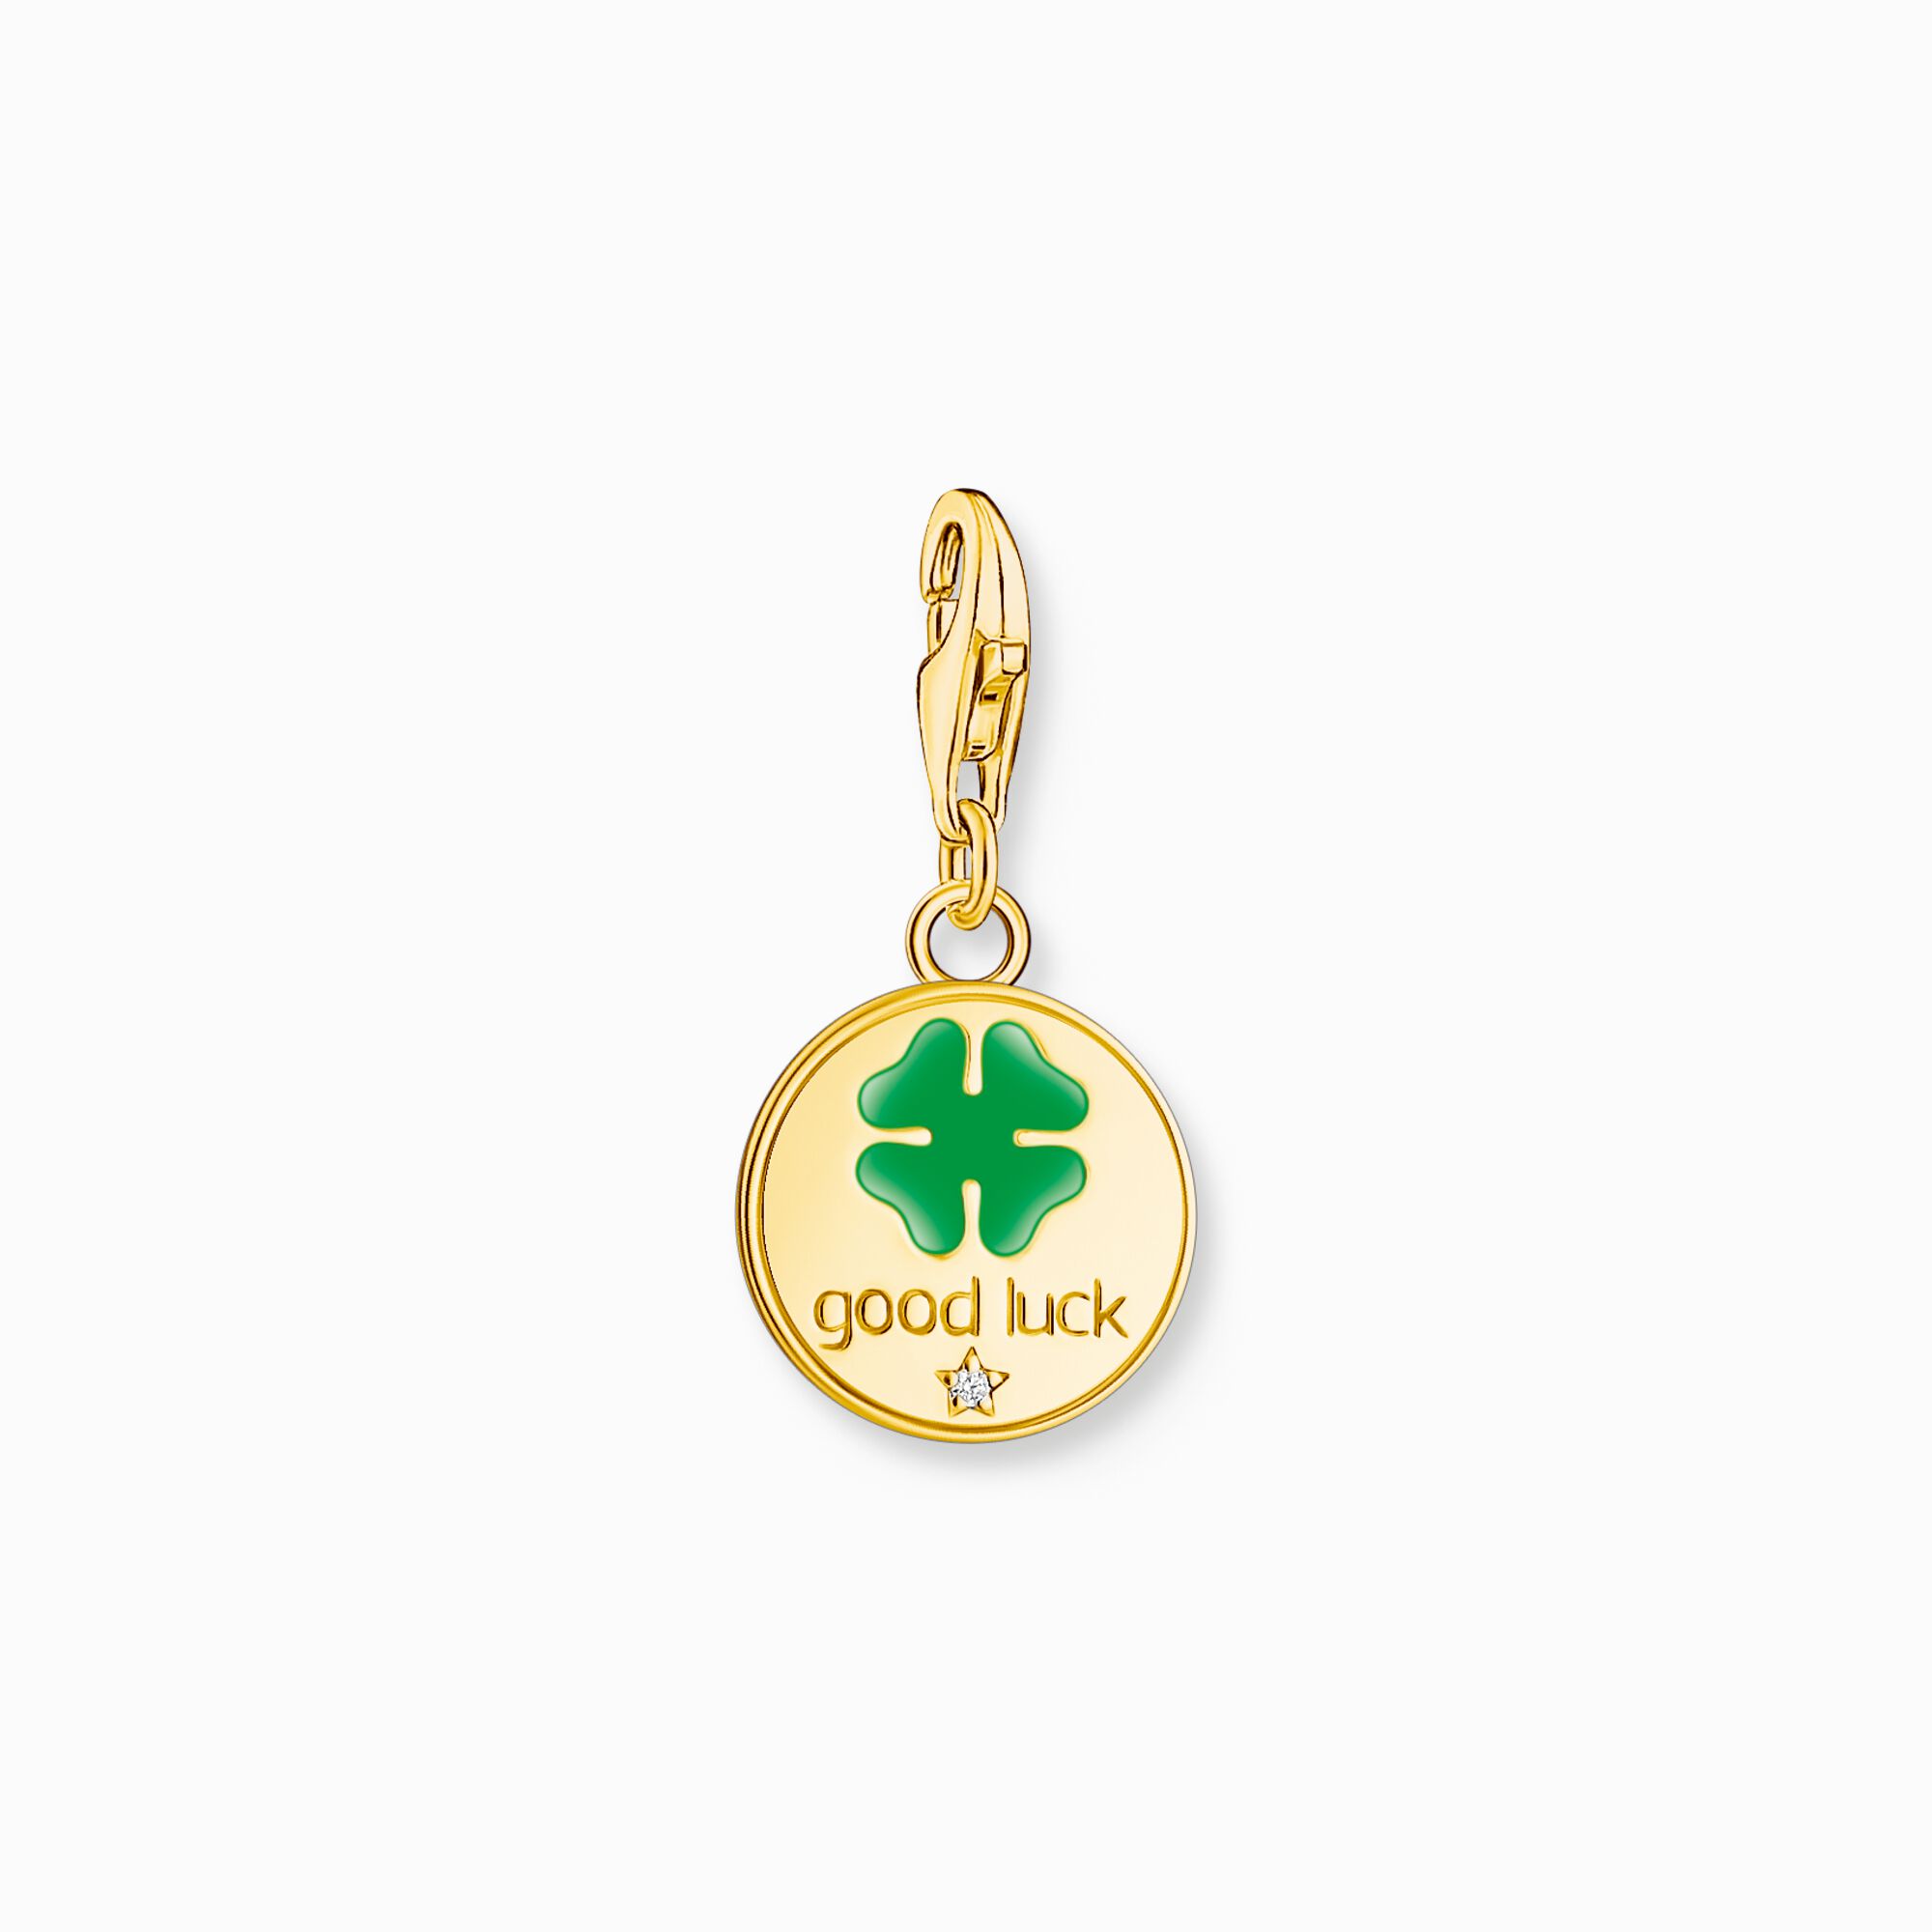 Gold-plated member charm pendant medal-shaped with colourful stones from the Charm Club collection in the THOMAS SABO online store